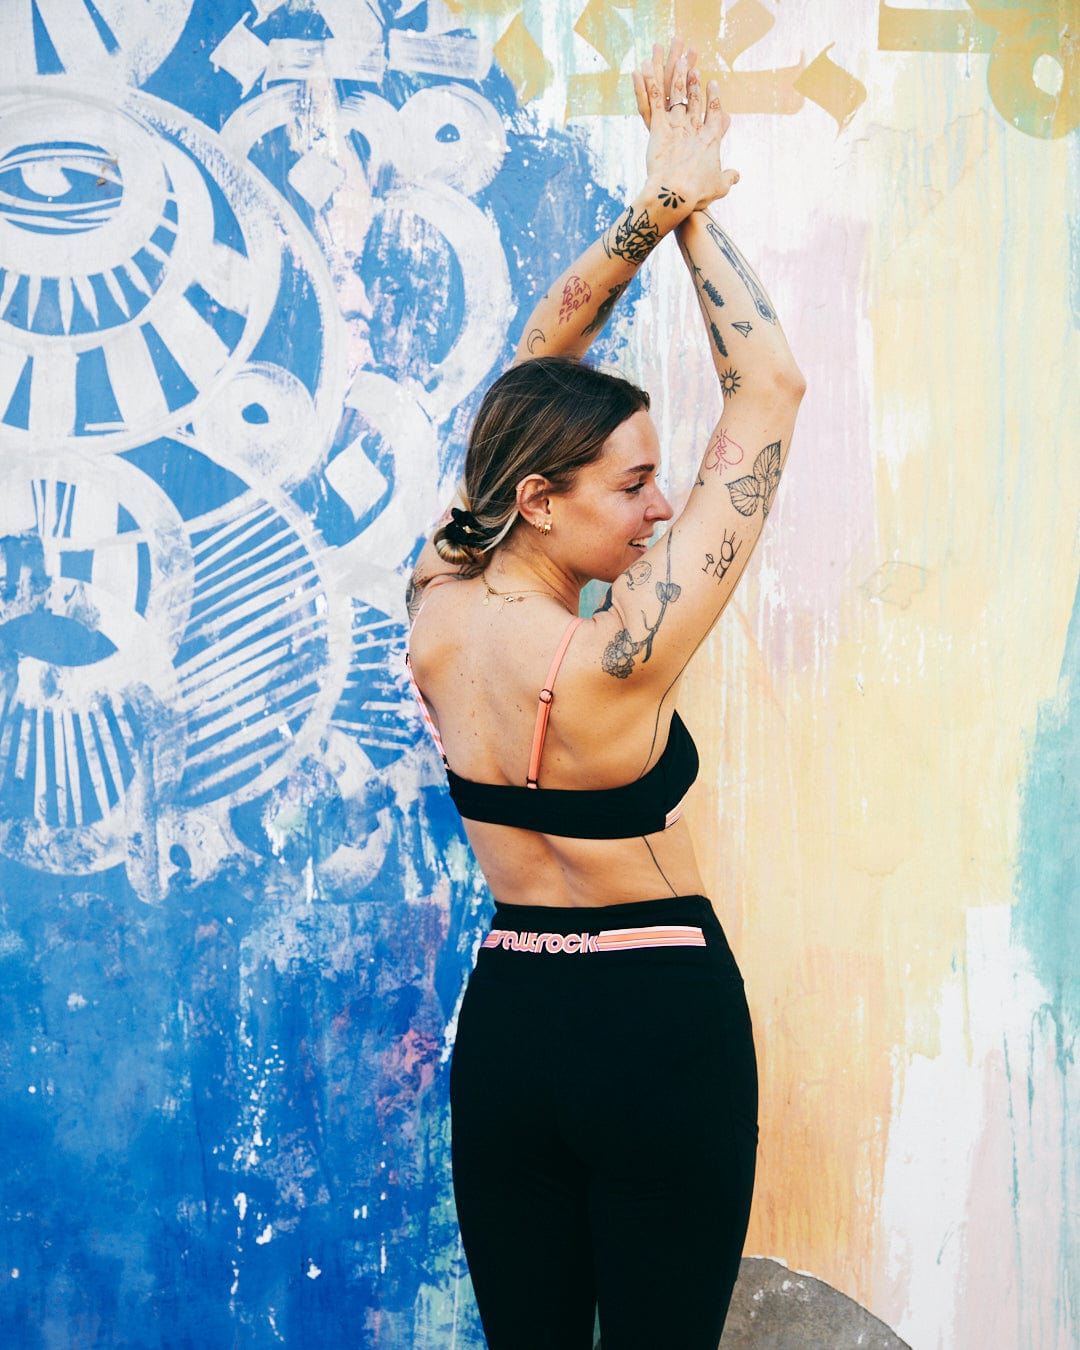 A woman with tattoos smiles and stretches her arms up against a colorful graffiti wall, wearing Retro Ribbon leggings by Saltrock, crafted from super soft fabric.